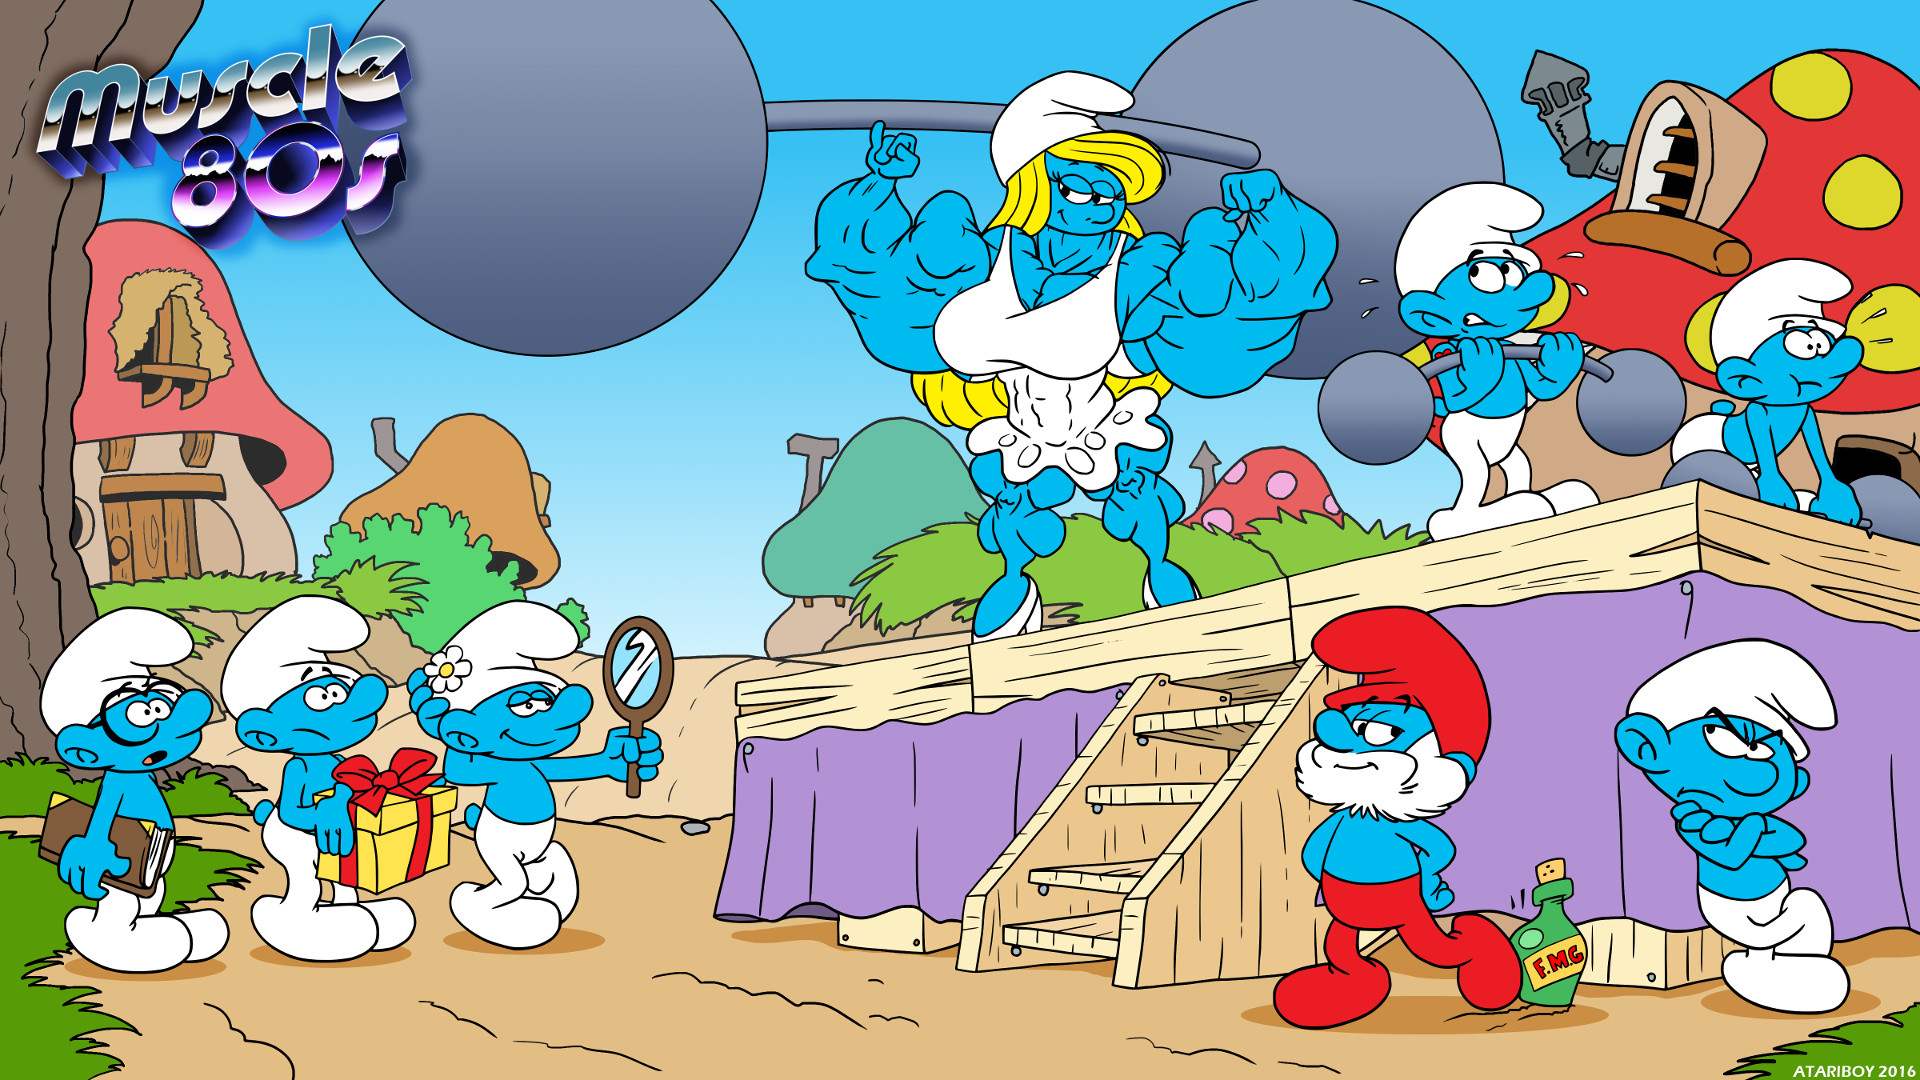 Muscle 80s - The Smurf.